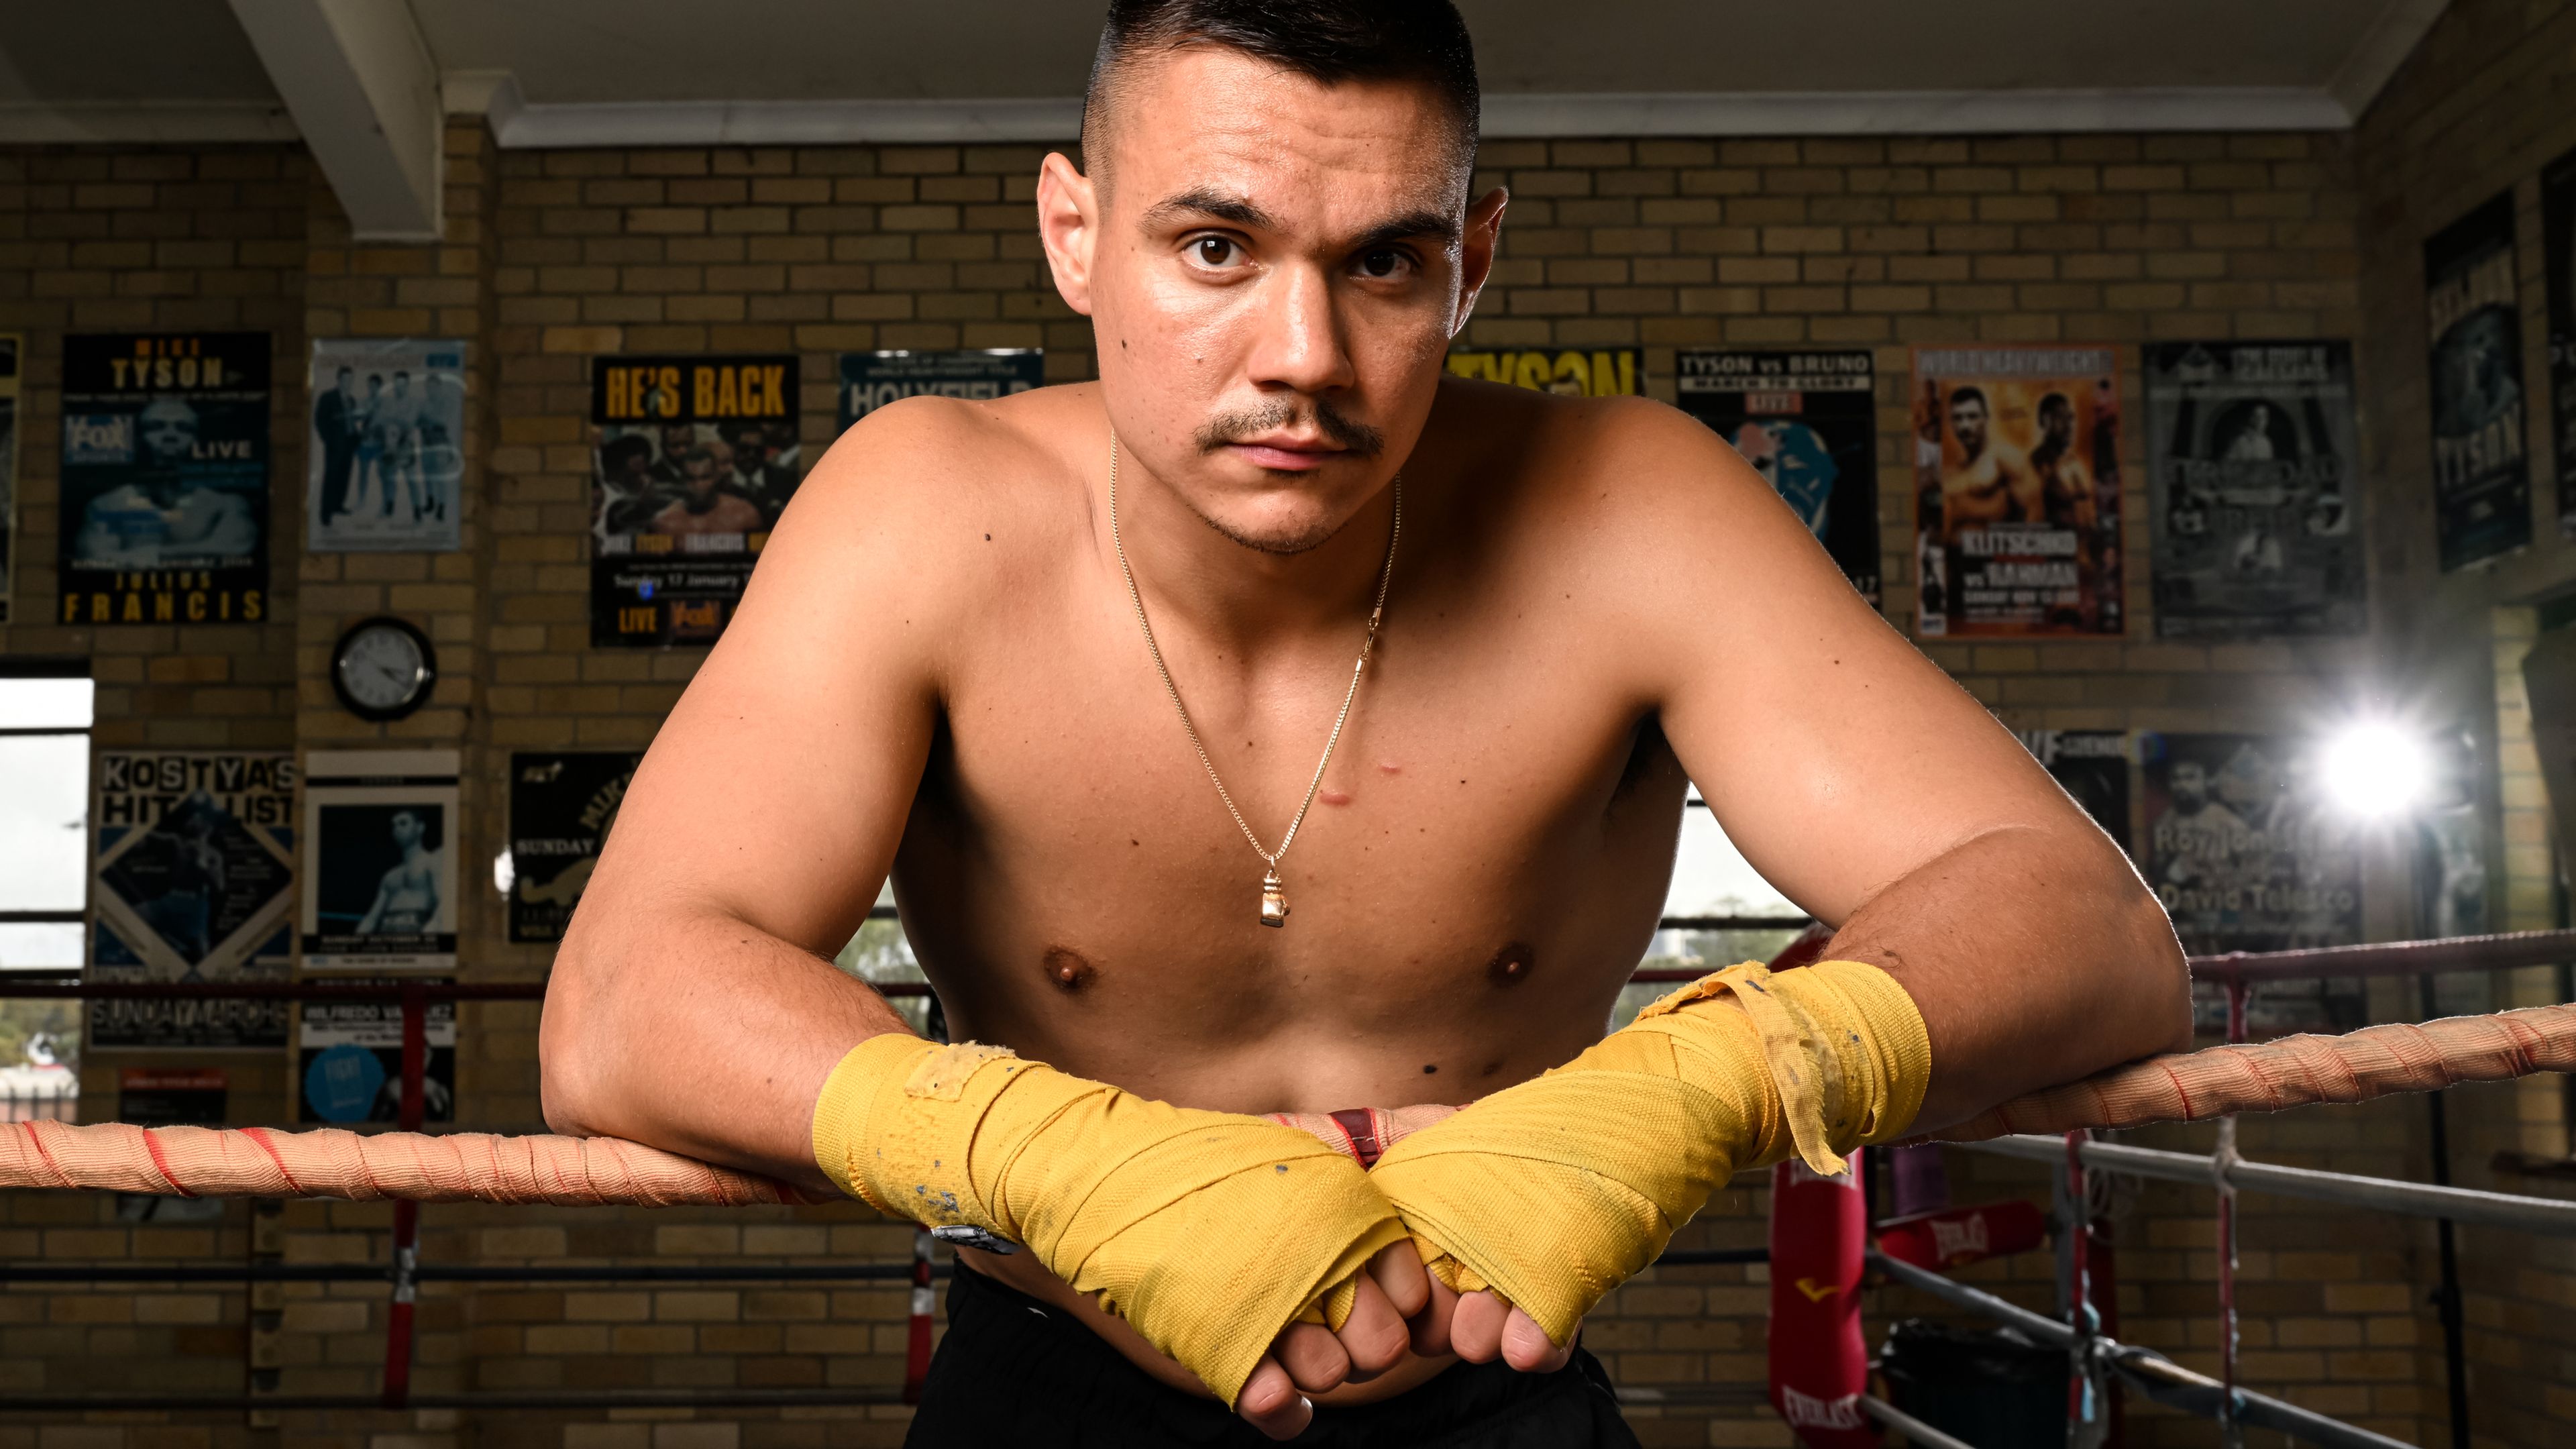 'Disappointing': Tim Tszyu title fight against Jermell Charlo put on ice